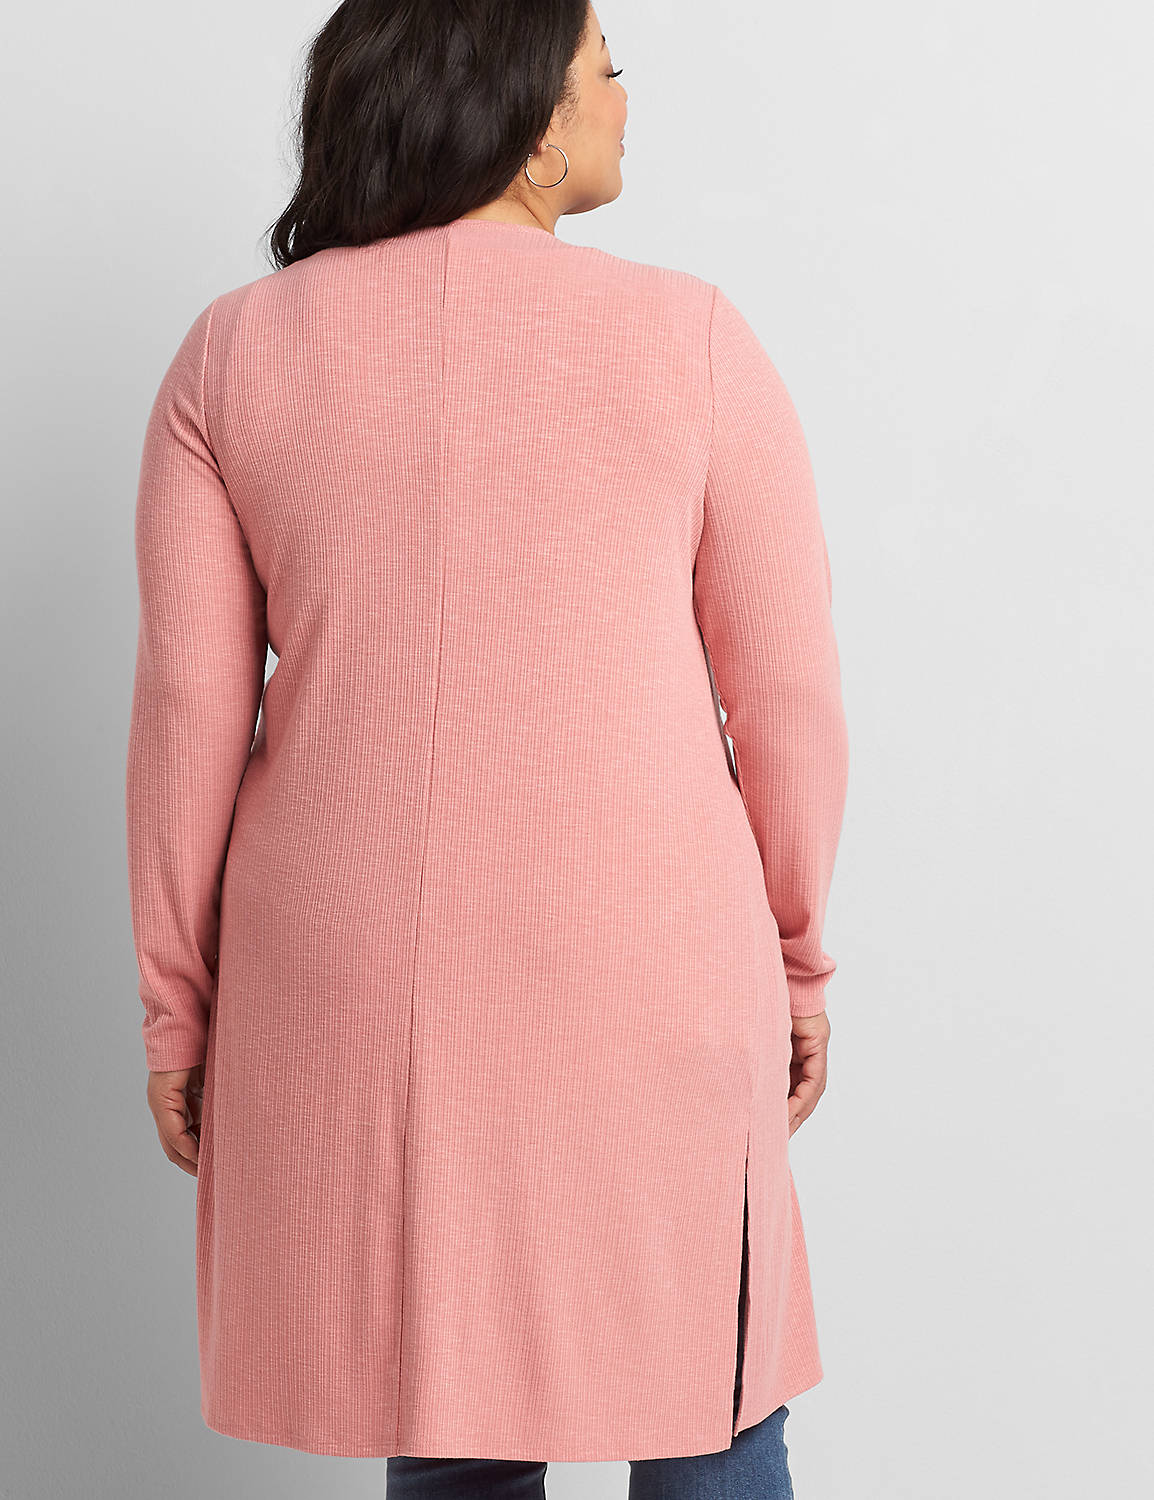 Long Sleeve V Neck Double Tie Front Duster 1118694:PANTONE Dusty Rose:18/20 Product Image 2